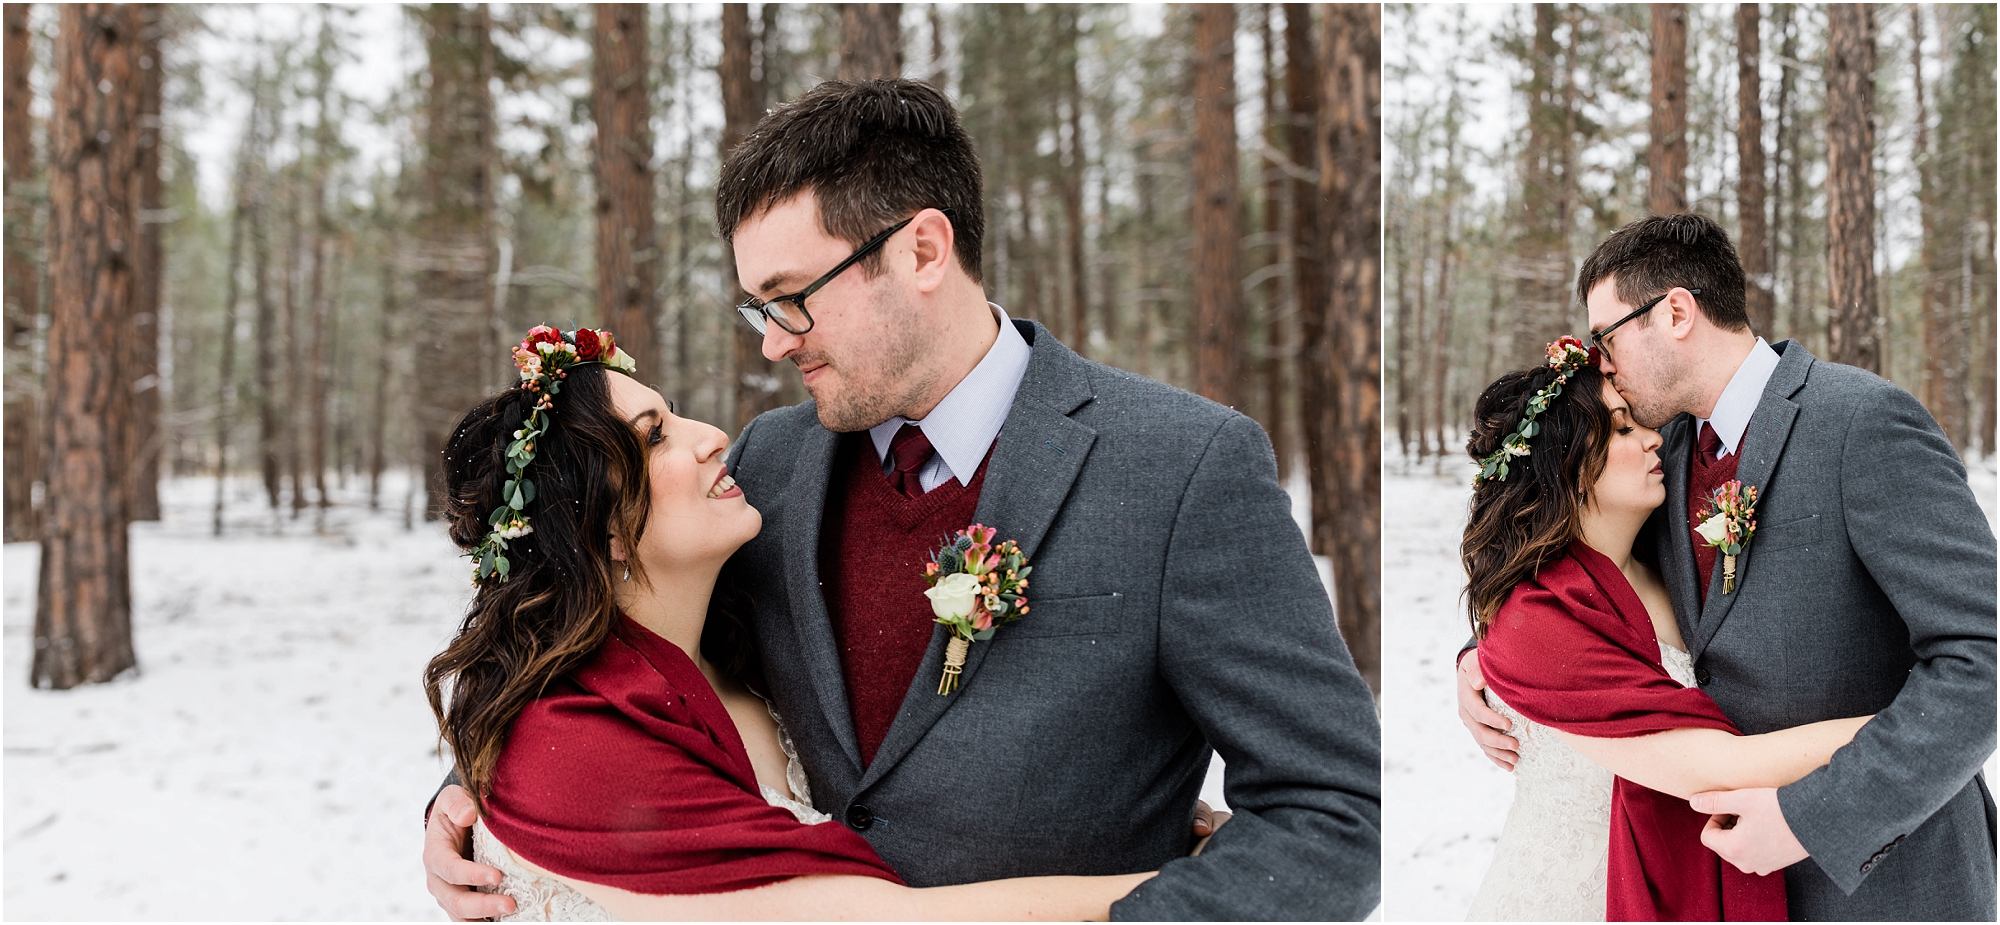 A groom gently kisses his bride's forehead in the snow at their winter elopement at Five Pine Lodge in Sisters, Oregon. | Erica Swantek Photography